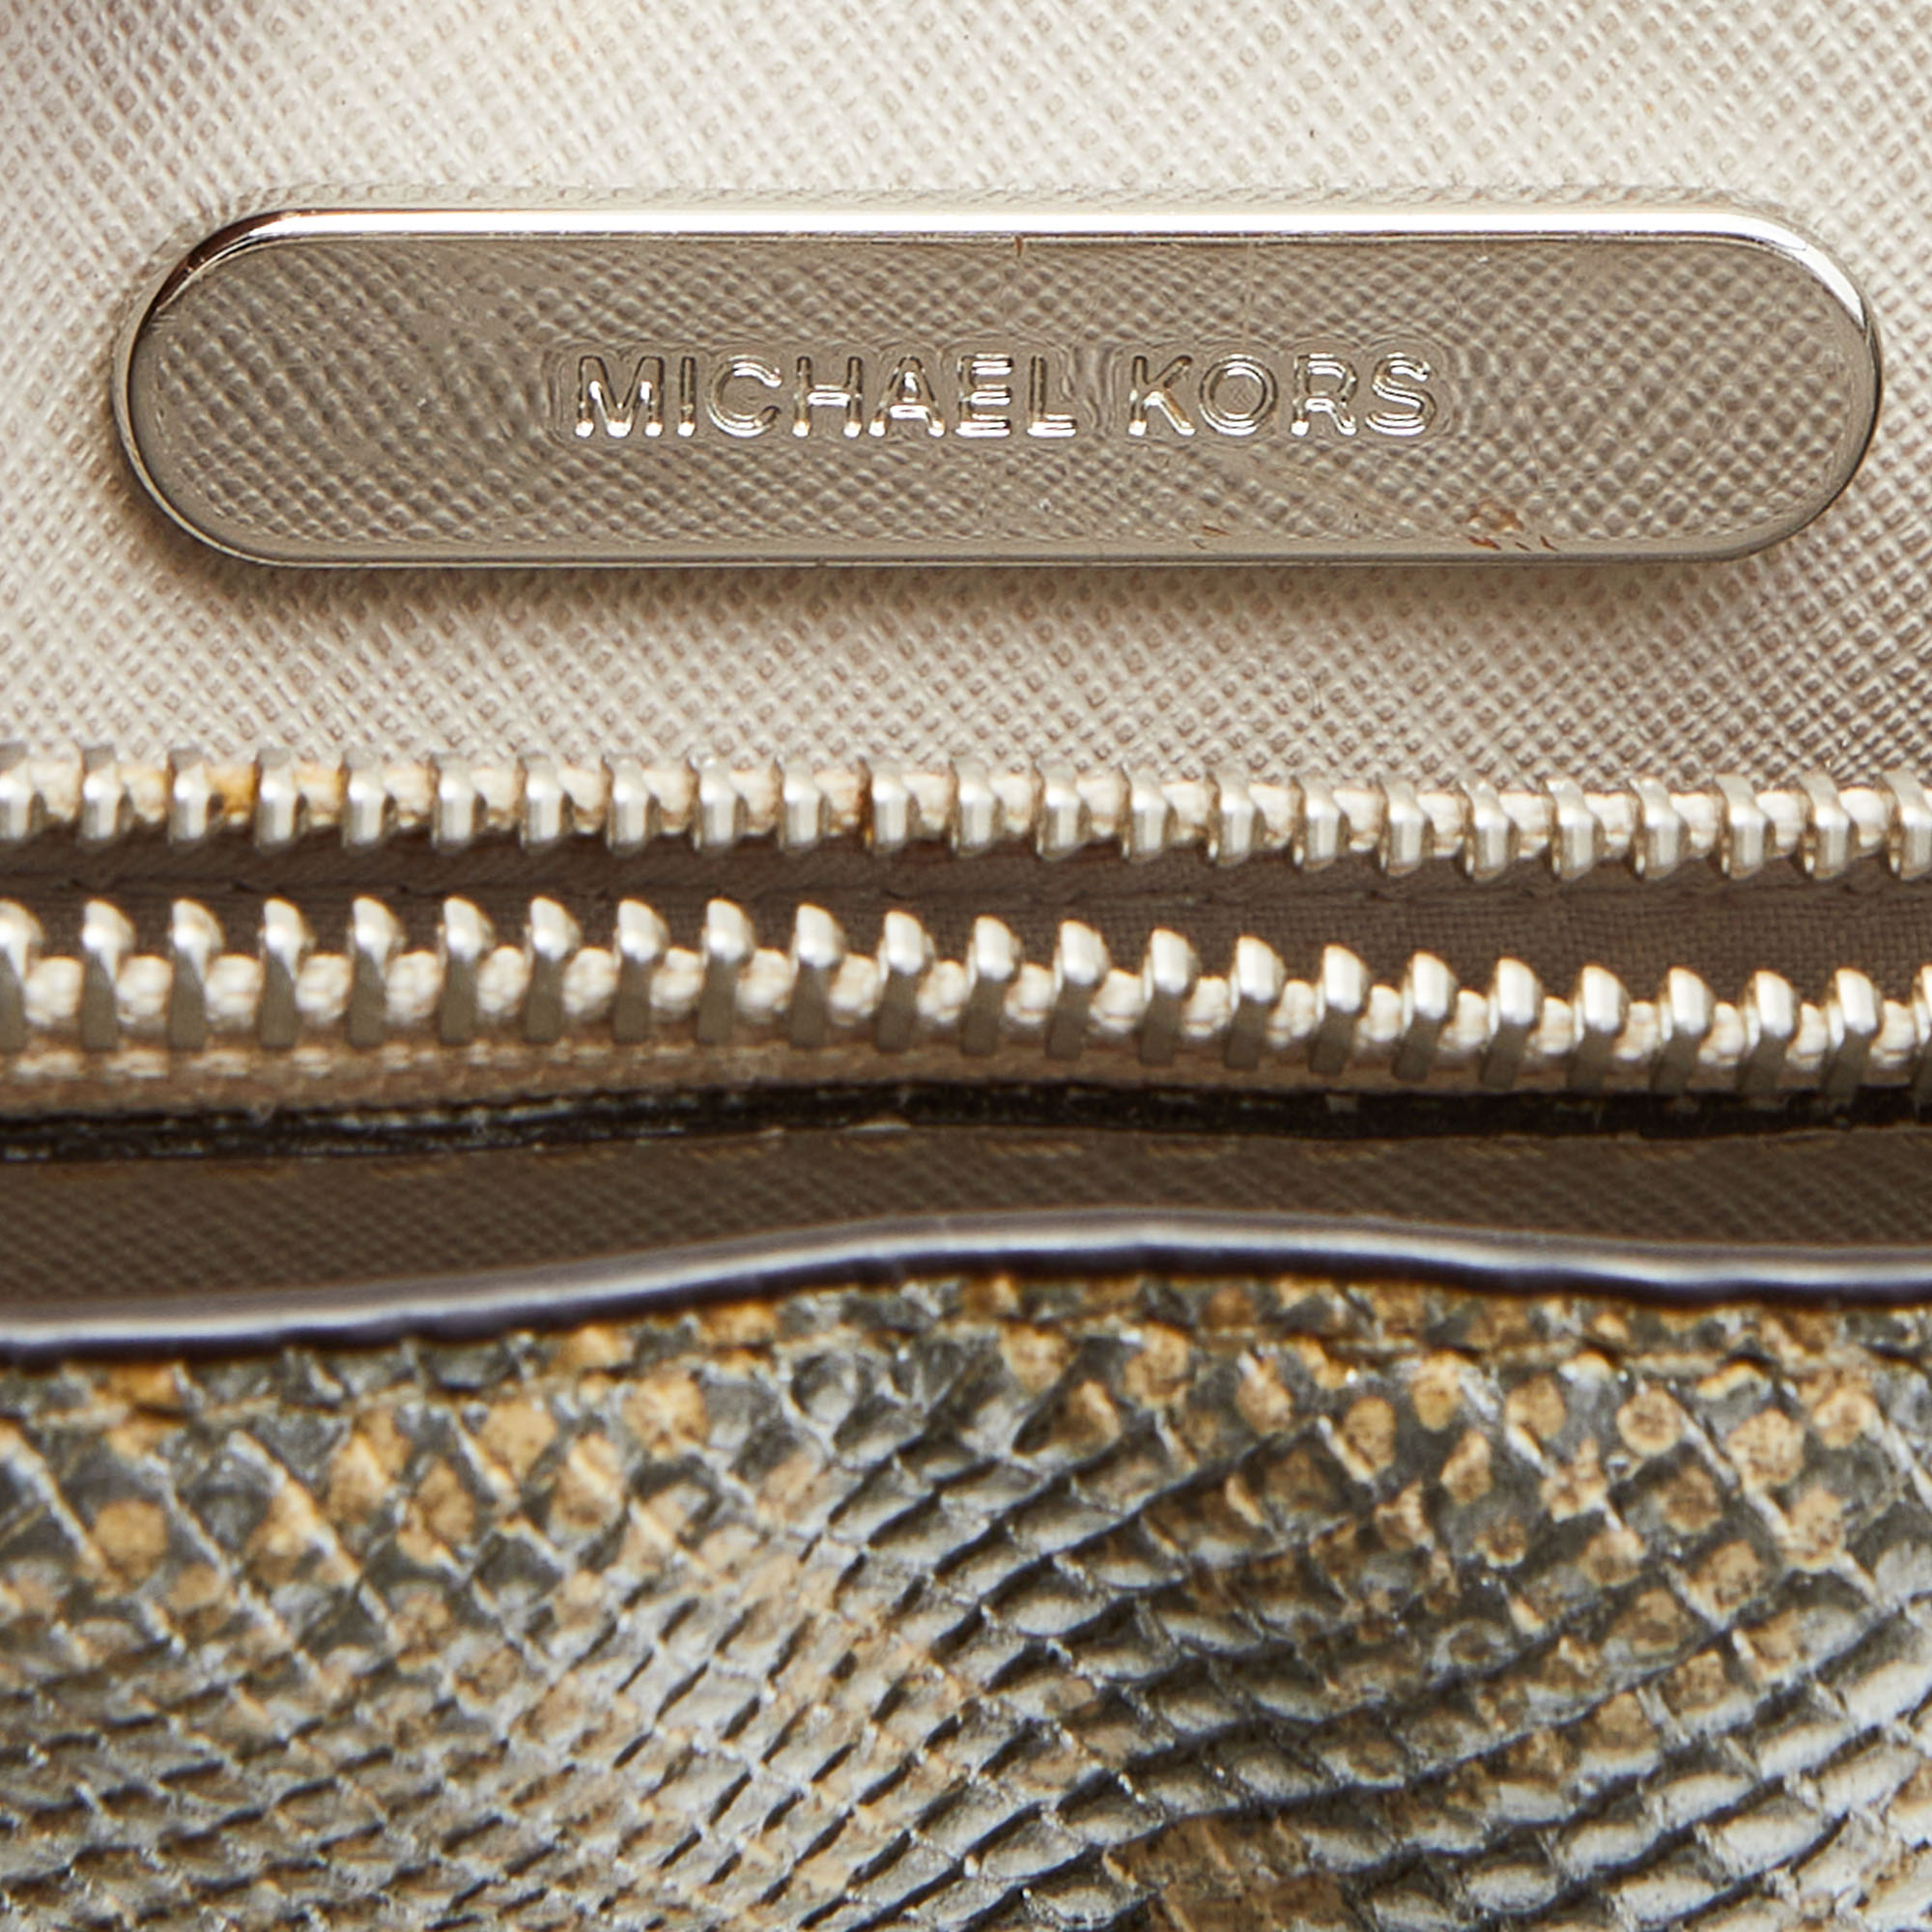 Michael Kors Beige/Gold Python Embossed Leather Small Mercer Tote